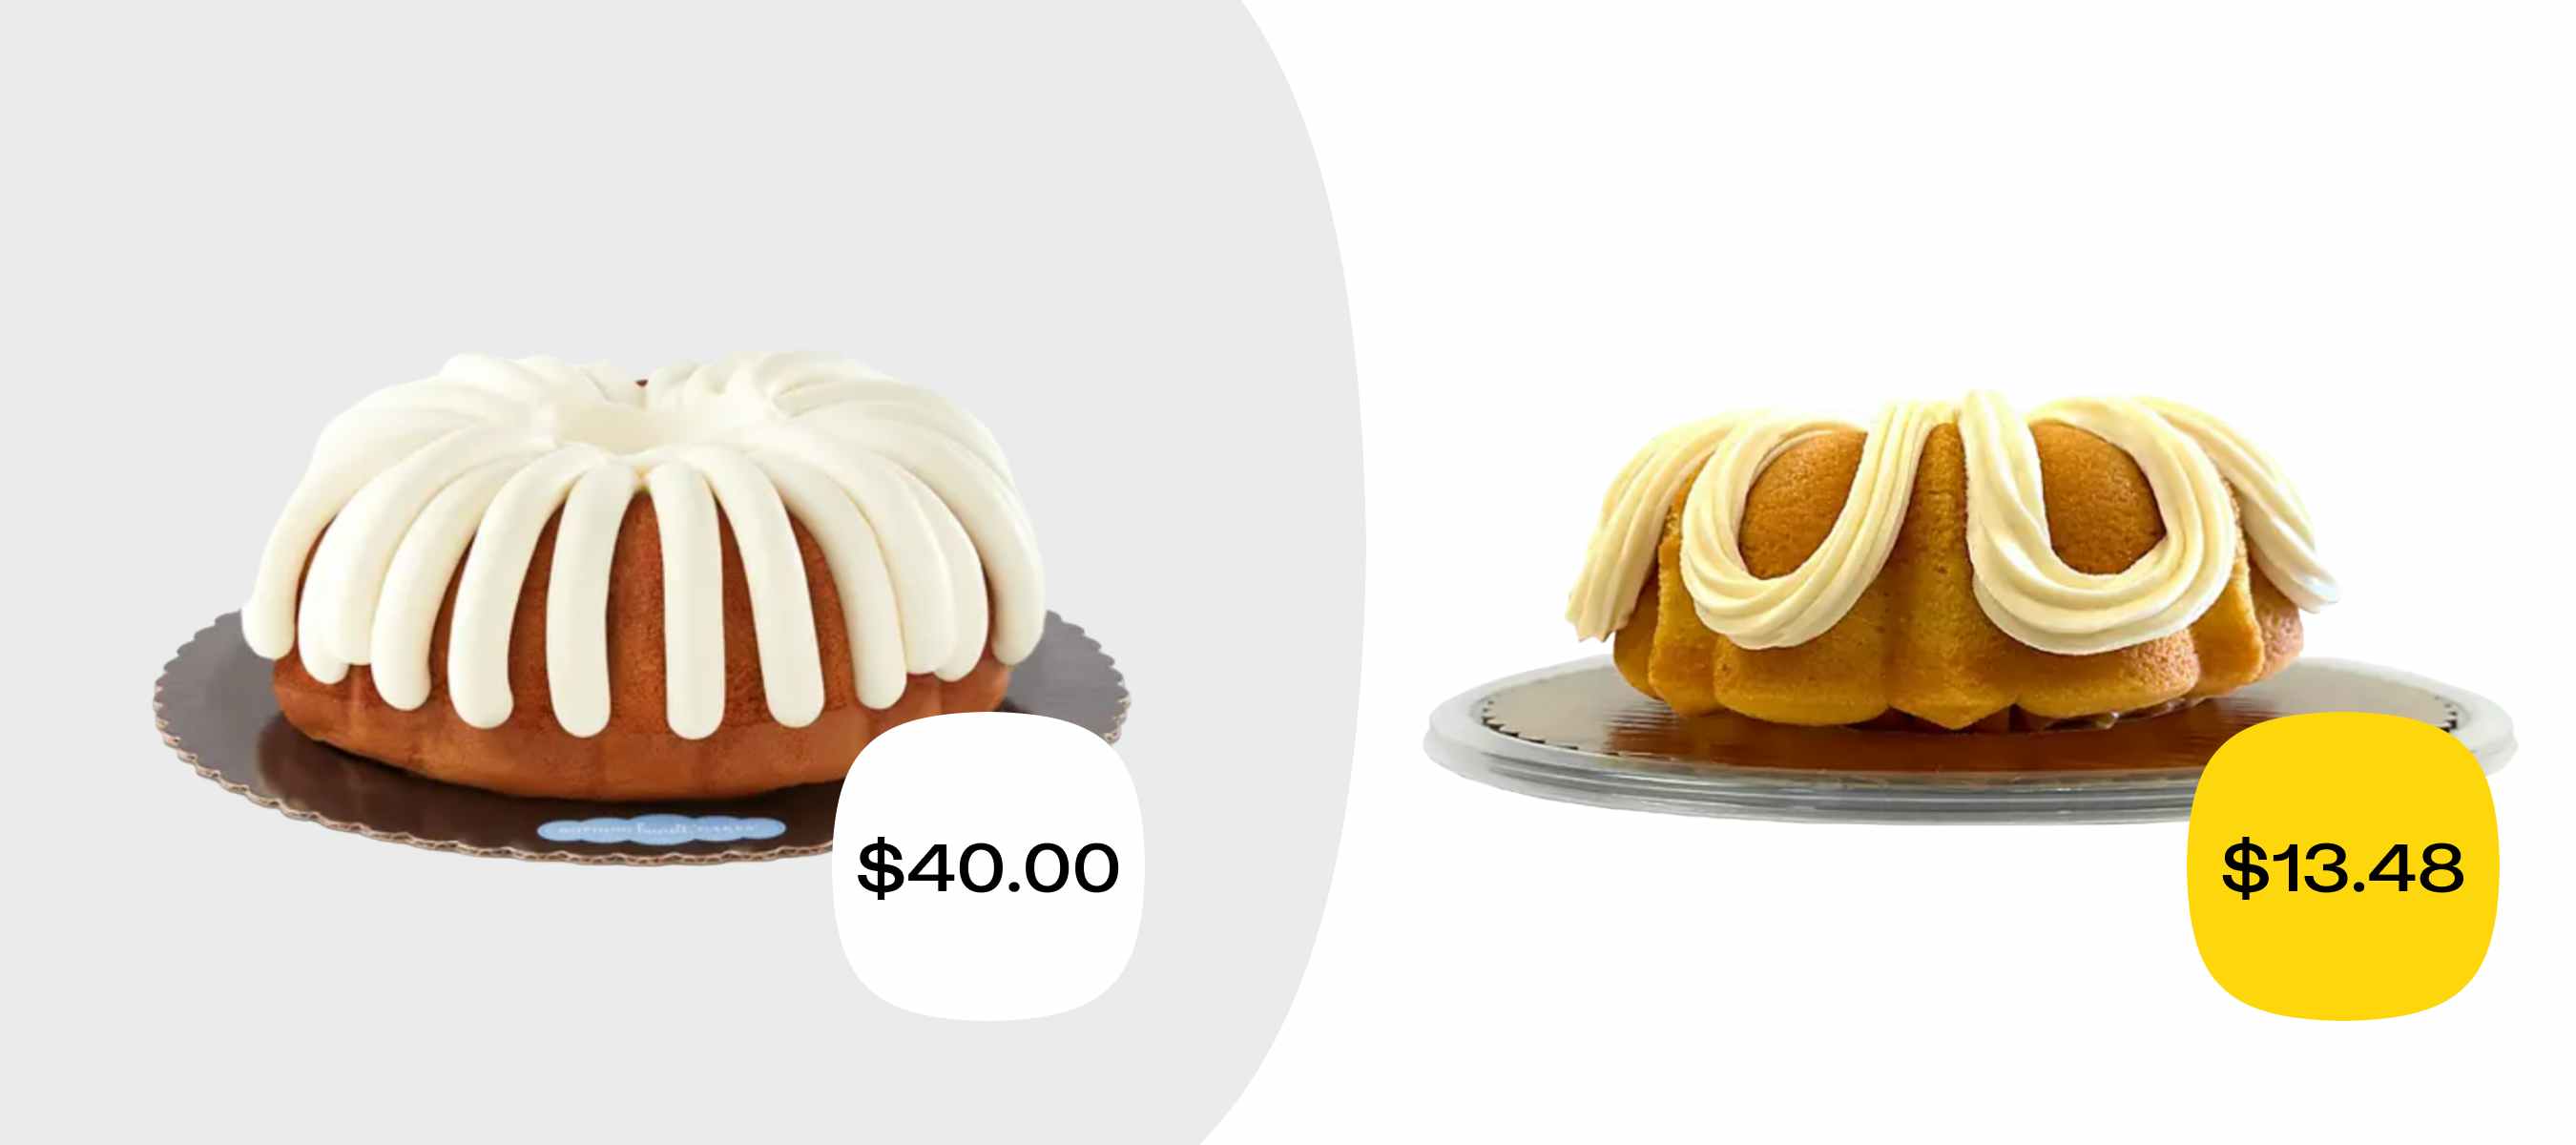 nothing bundt cake lemon 10 inch cake for $40 compared to a similar cake from sam's club for $13.48